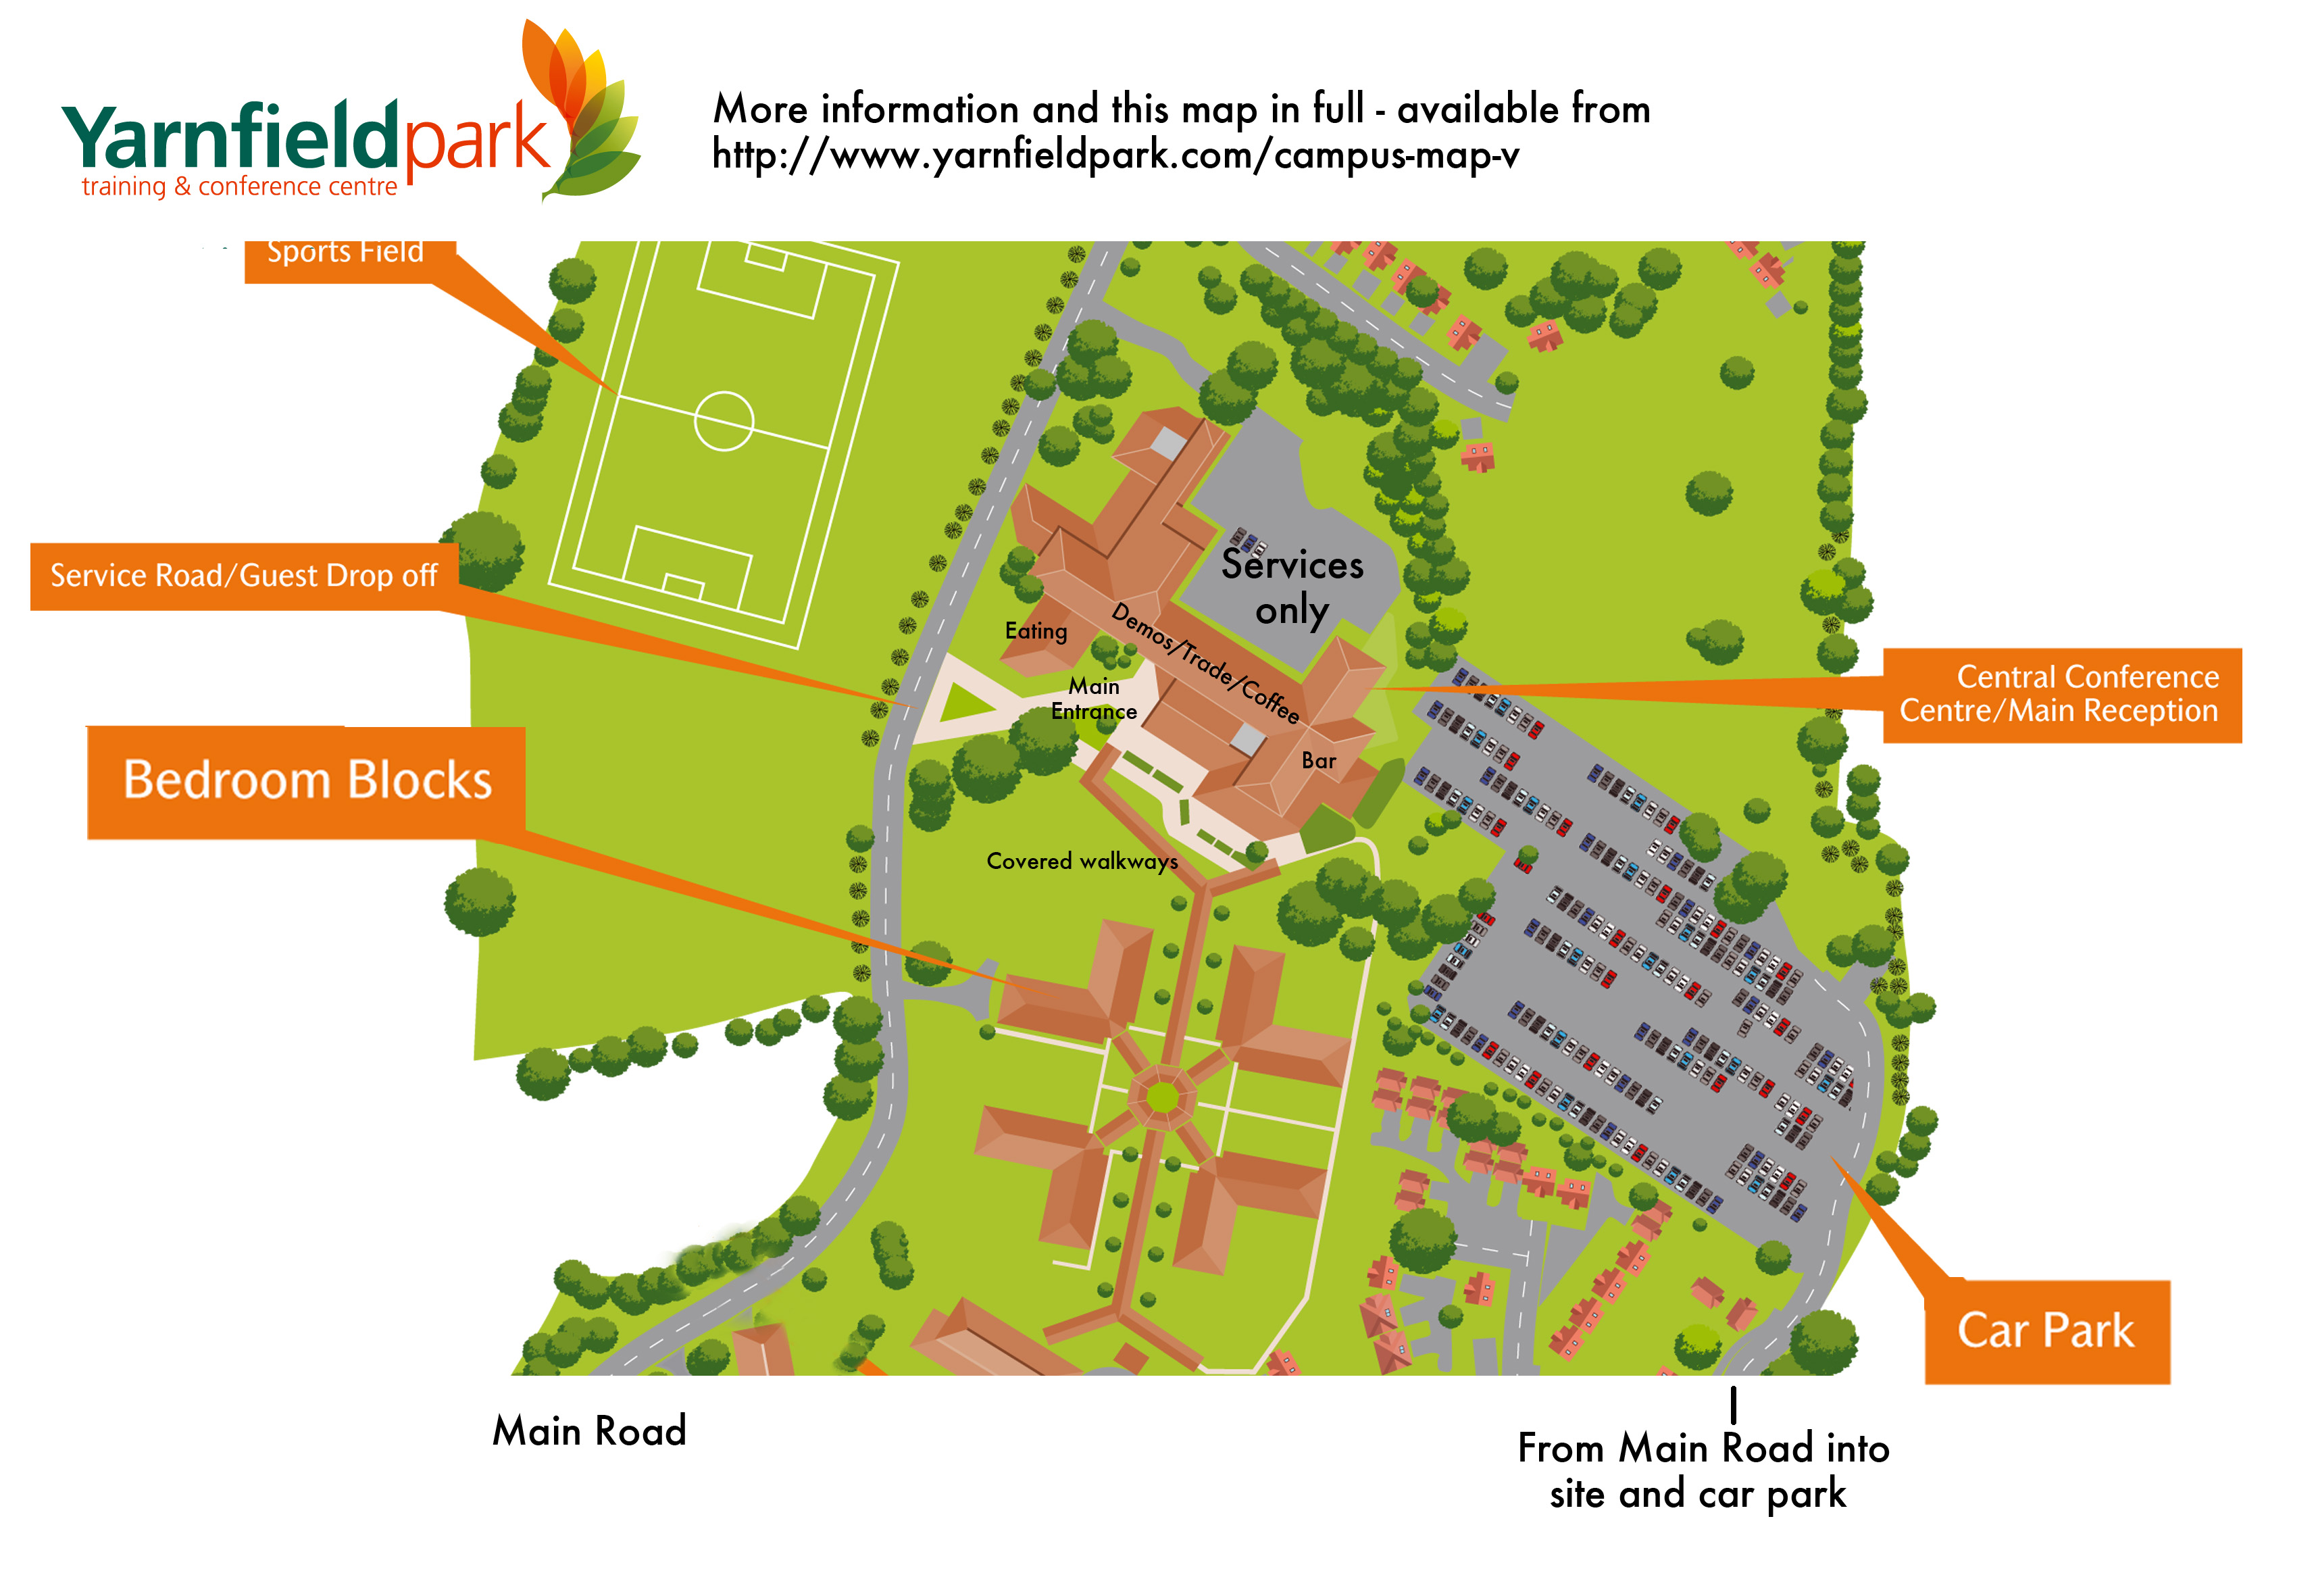 Map for the 2018 AWGB woodturning seminar at Yarnfield Park